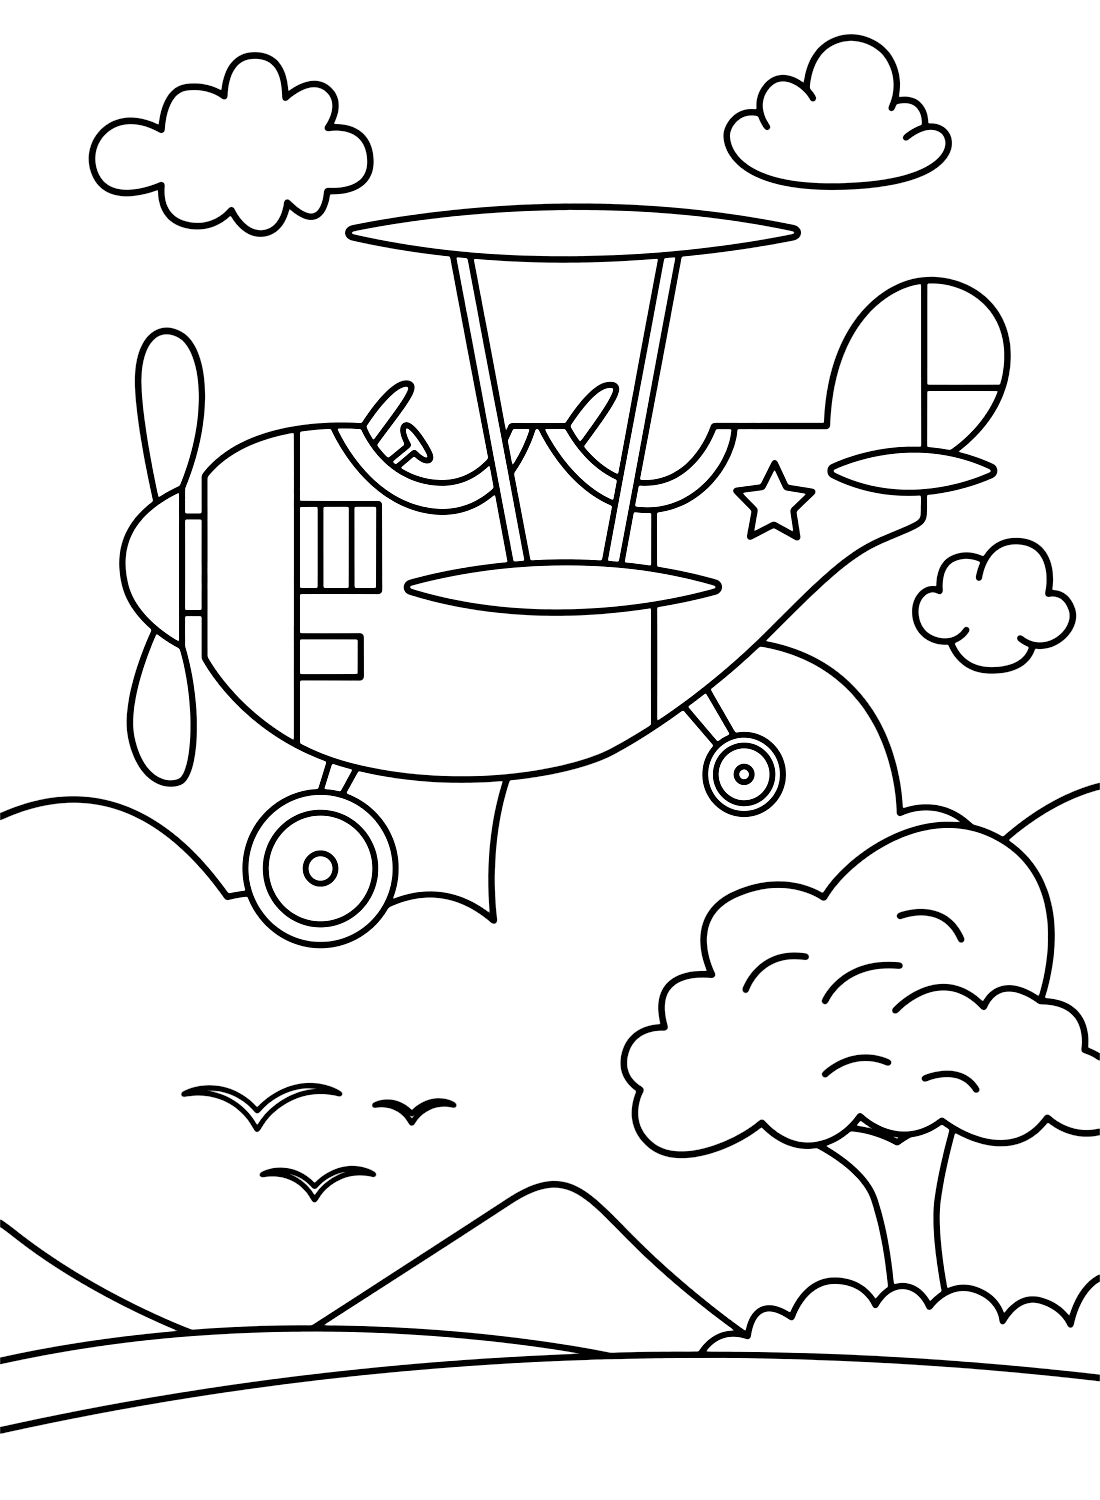 Explore the Sky with a Helicopter Coloring Pages